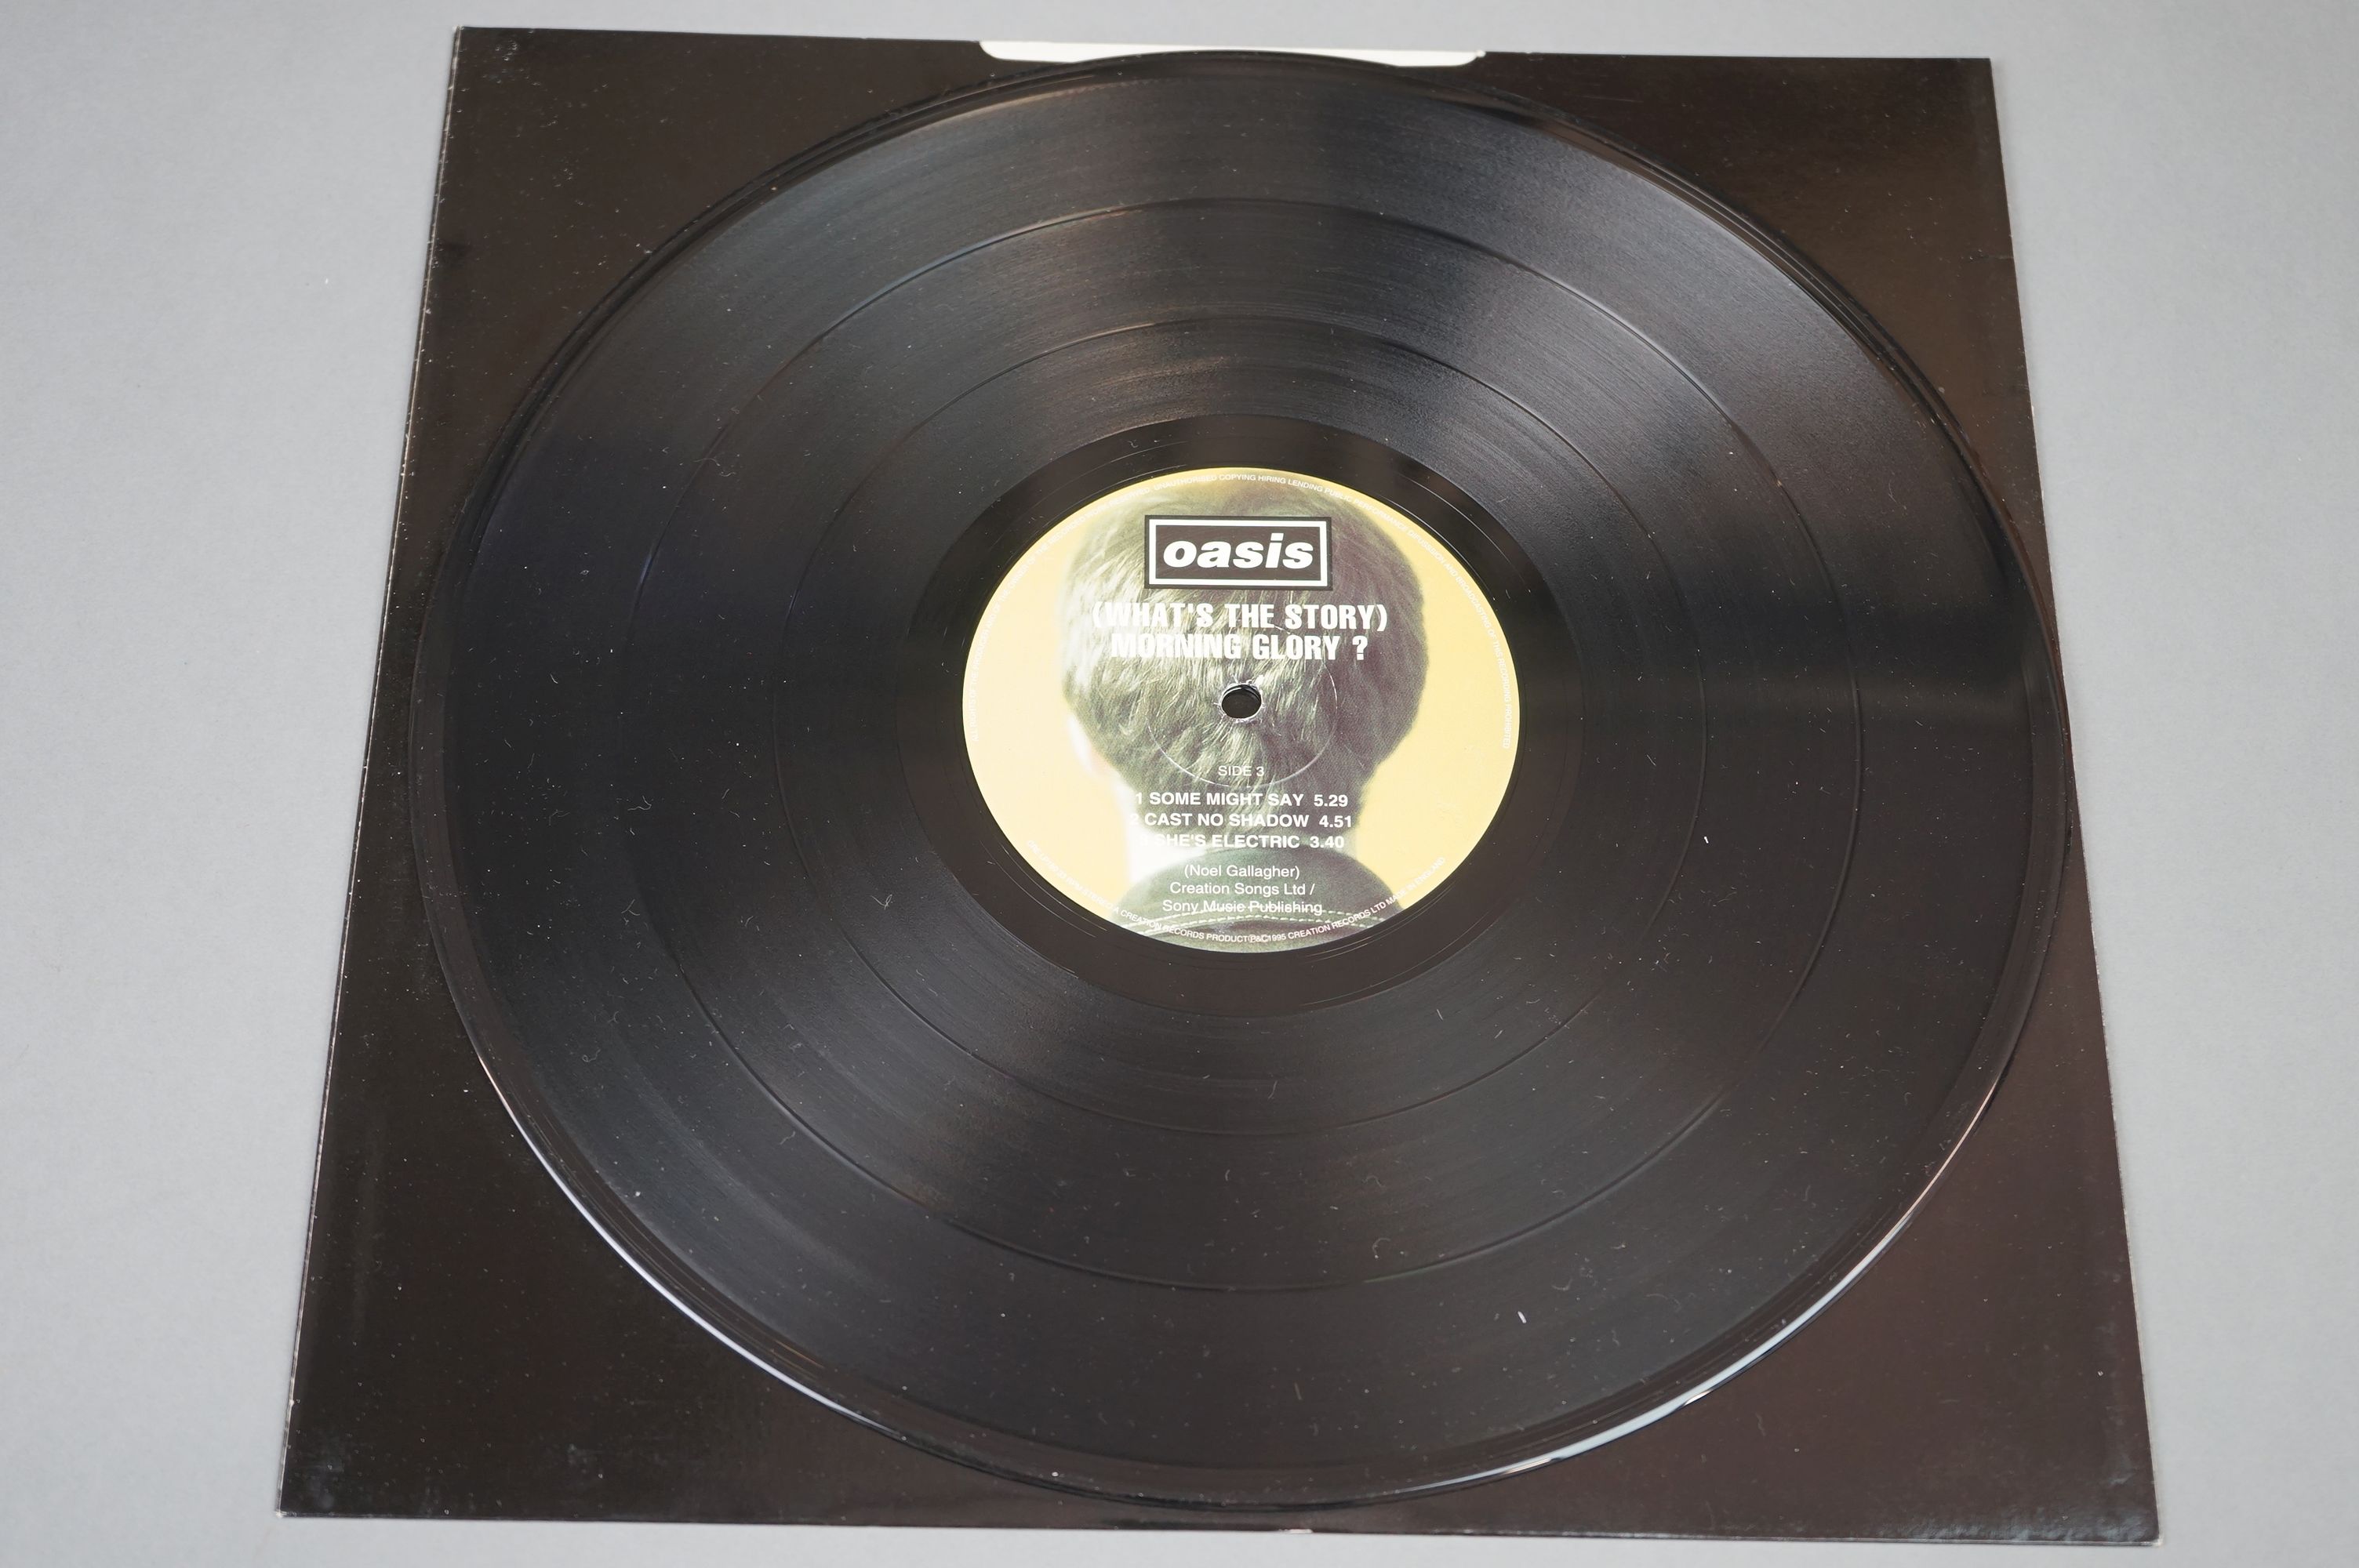 Vinyl - Oasis What's The Story Morning Glory? 2 LP on Creation CRELP189, sleeve has some indented - Image 9 of 9